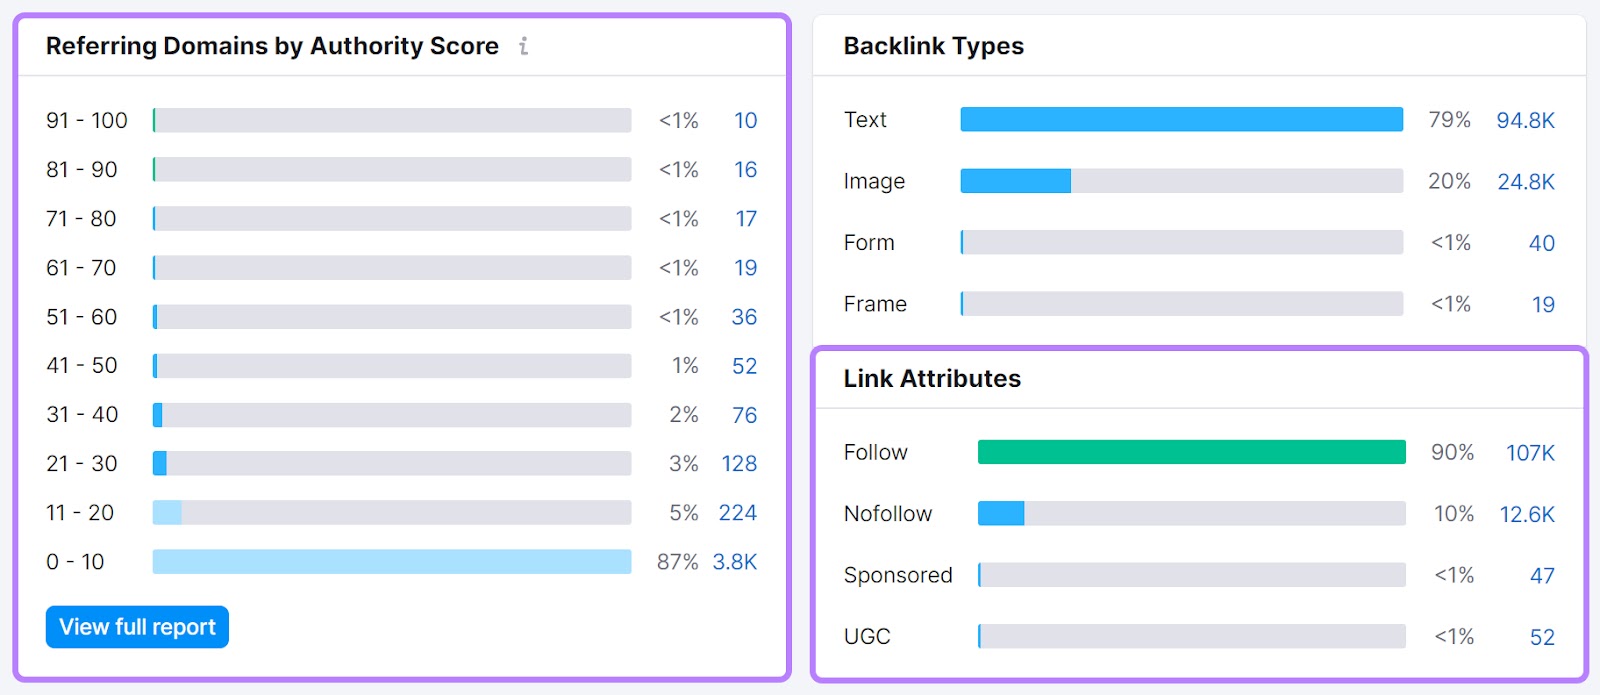 "Referring Domains by Authority Score," and "Link Attributes" widgets in Backlink Analytics report